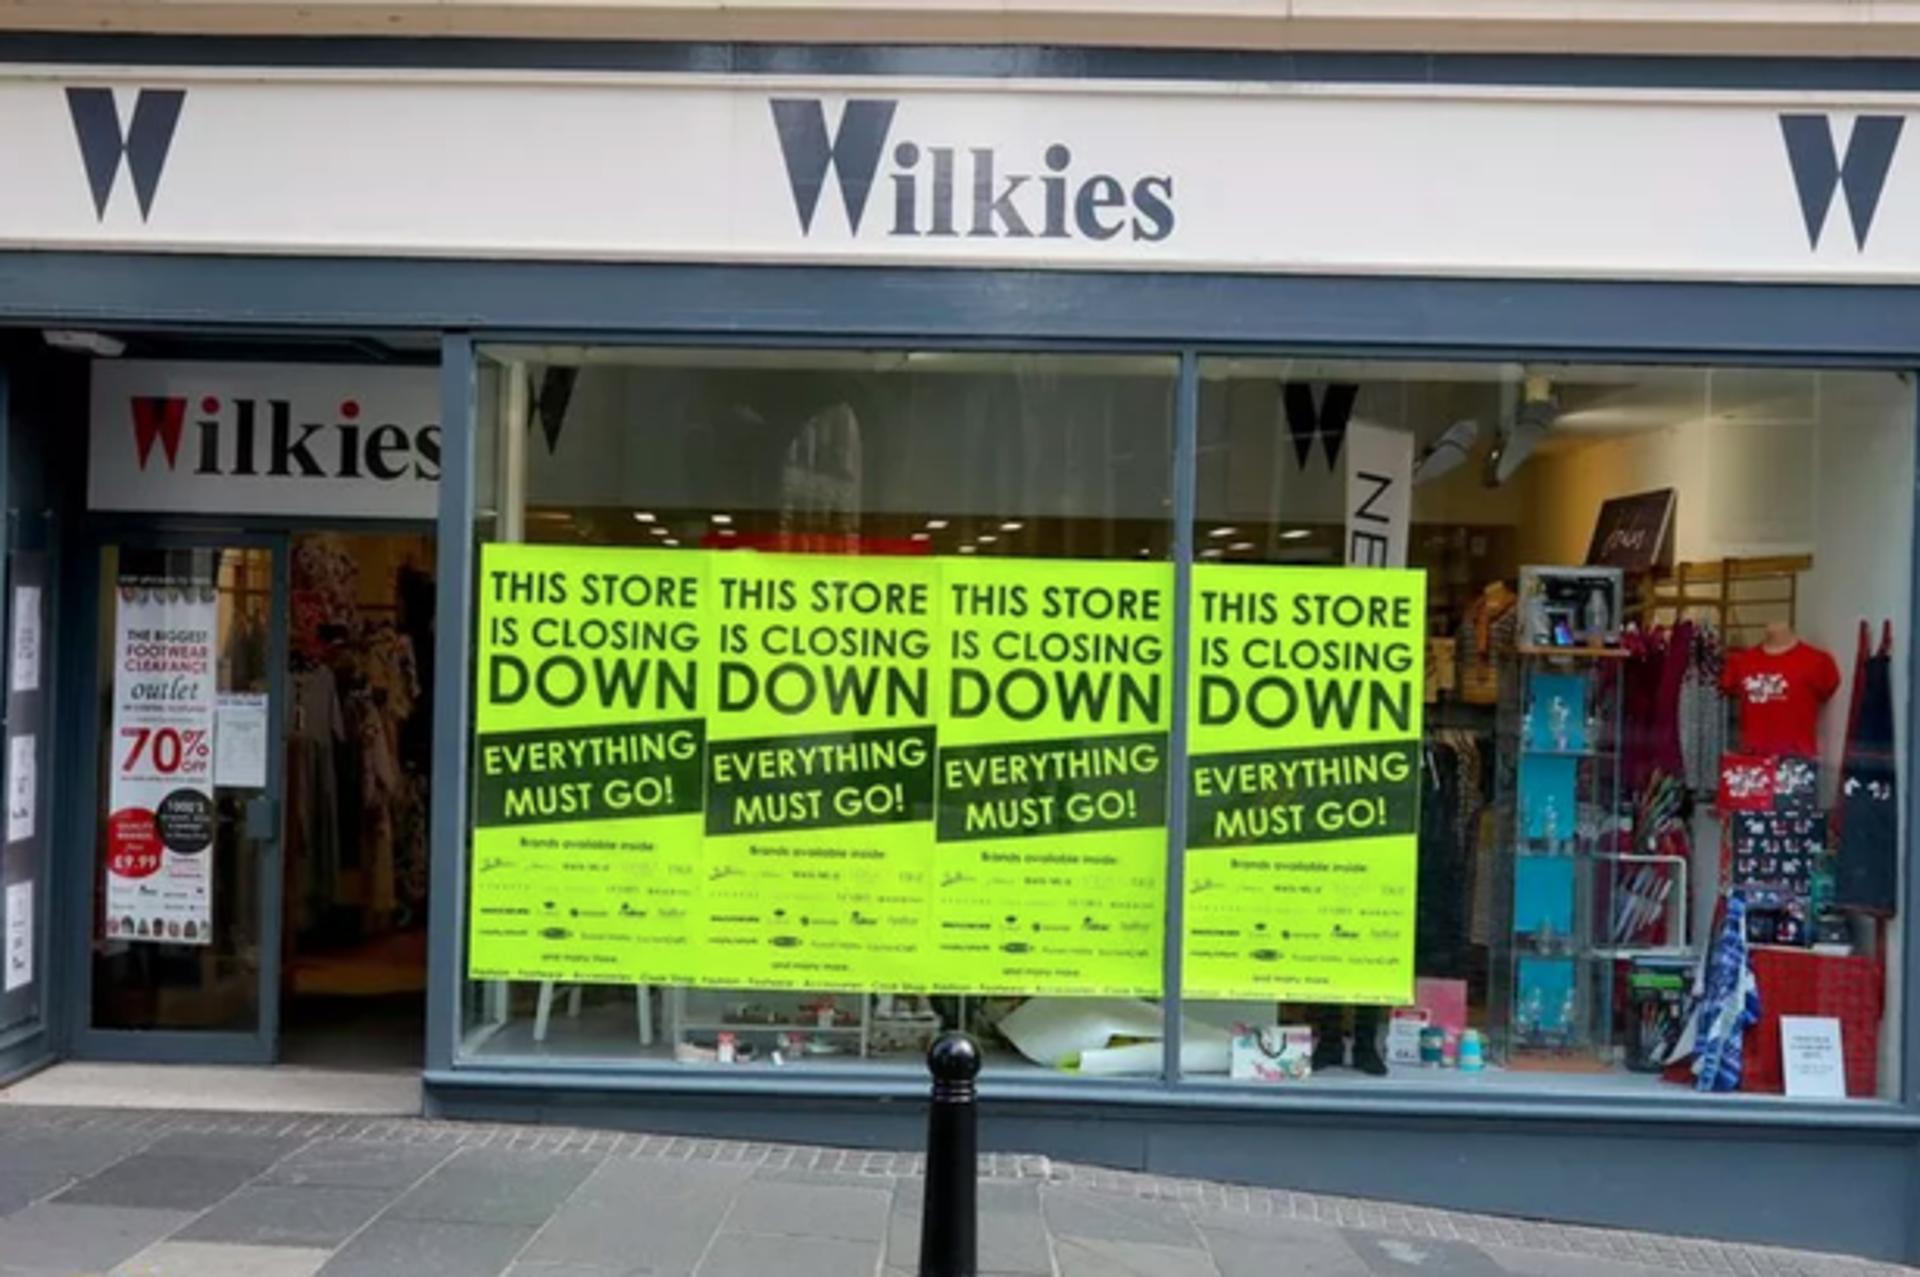 Scottish retail chain Wilkies acquired in pre-pack deal